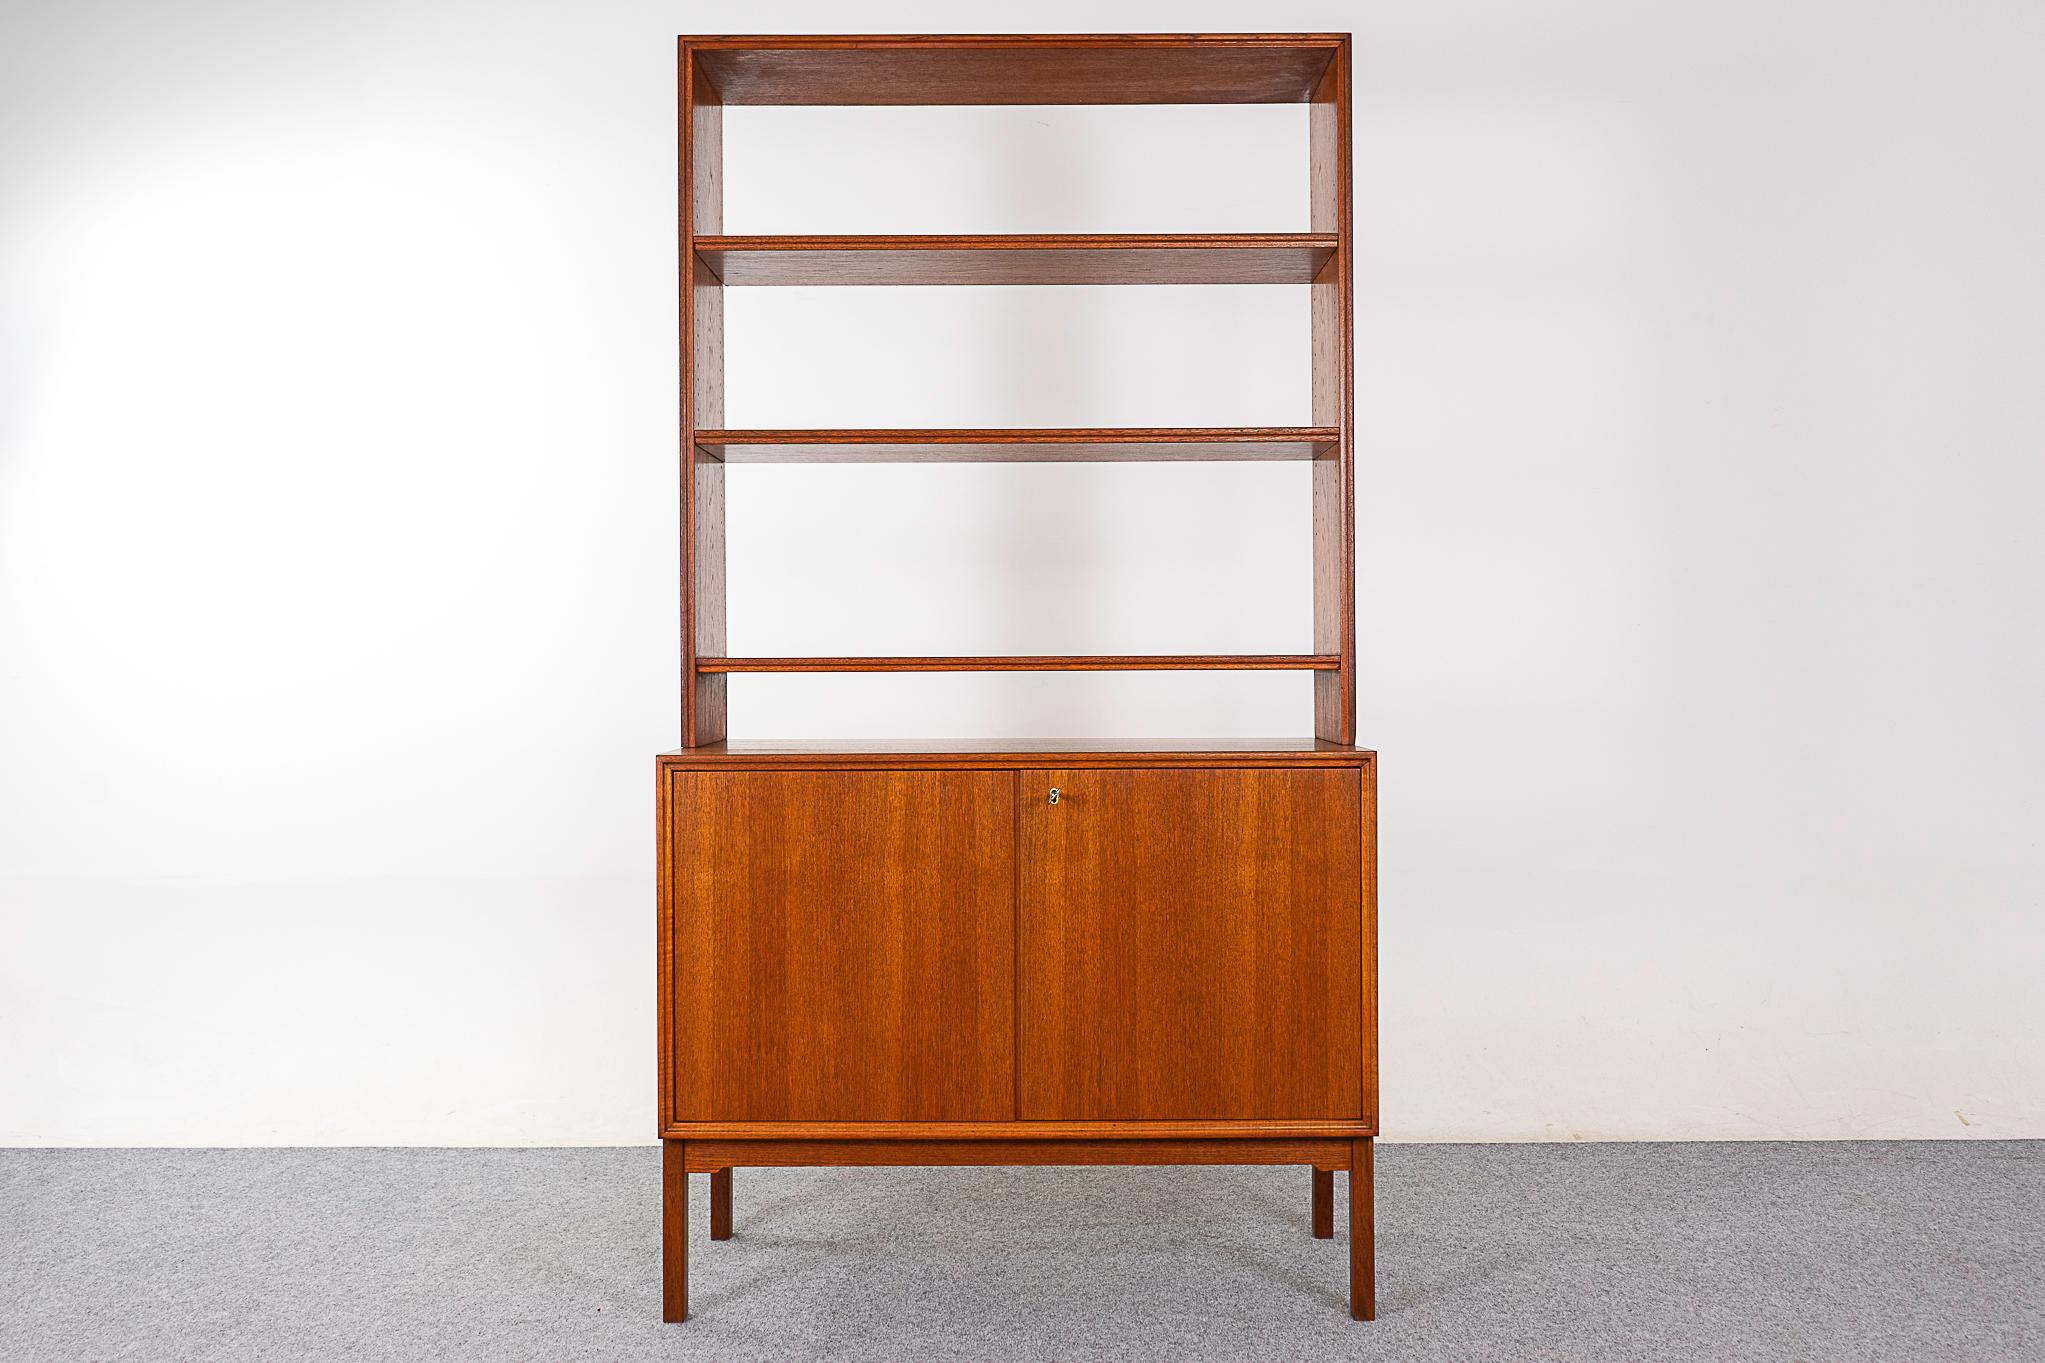 Teak Danish bookcase/cabinet, circa 1960's. Backless top with 3 adjustable shelves allows your wall color to show through, for a light, airly feel. Locking cabinet with height adjustable shelf. Great condition, warm, rich tone. Pieces can be used